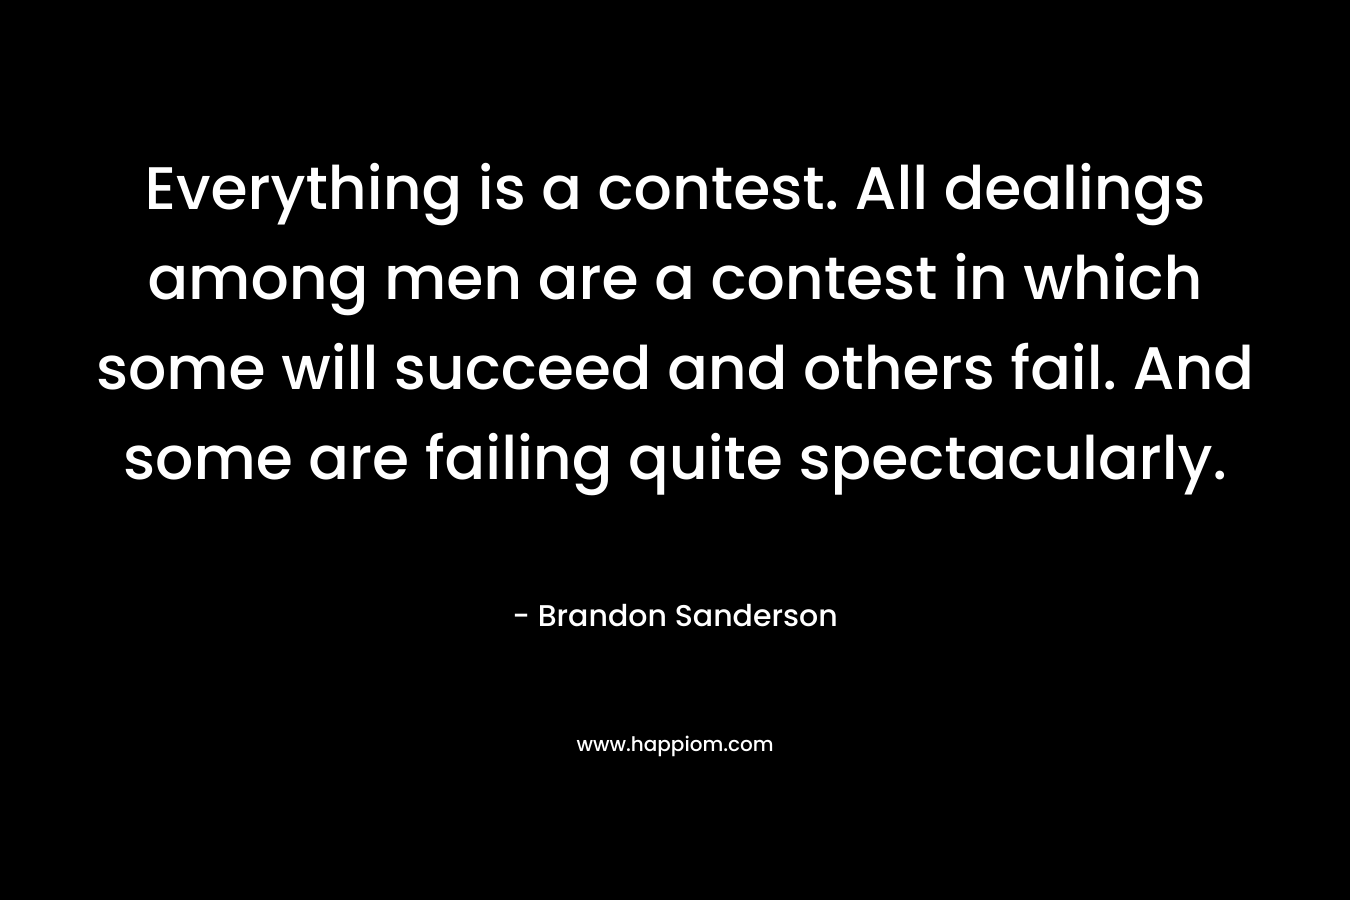 Everything is a contest. All dealings among men are a contest in which some will succeed and others fail. And some are failing quite spectacularly.